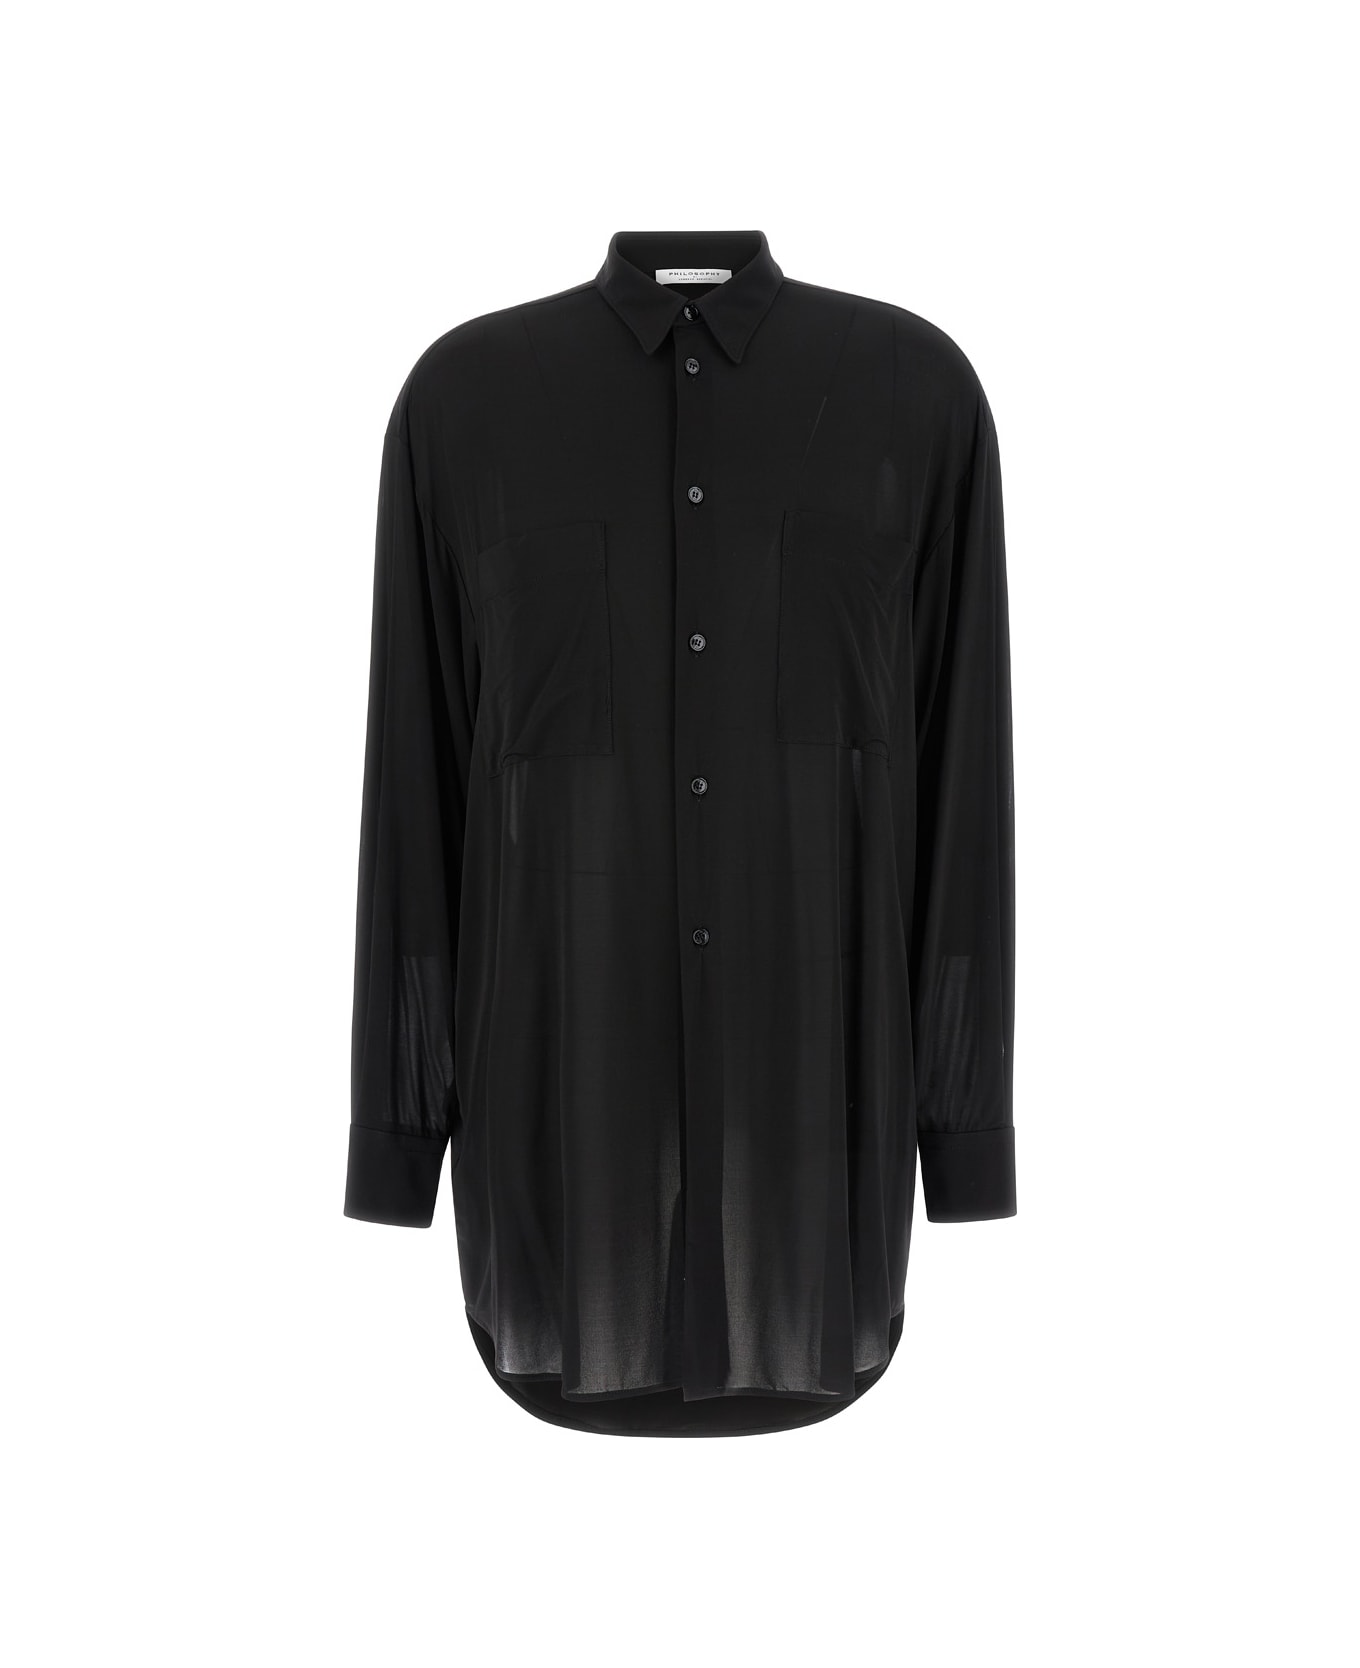 Philosophy di Lorenzo Serafini Oversized Black Shirt With Patch Pockets In Stretch Viscose Woman - Black シャツ